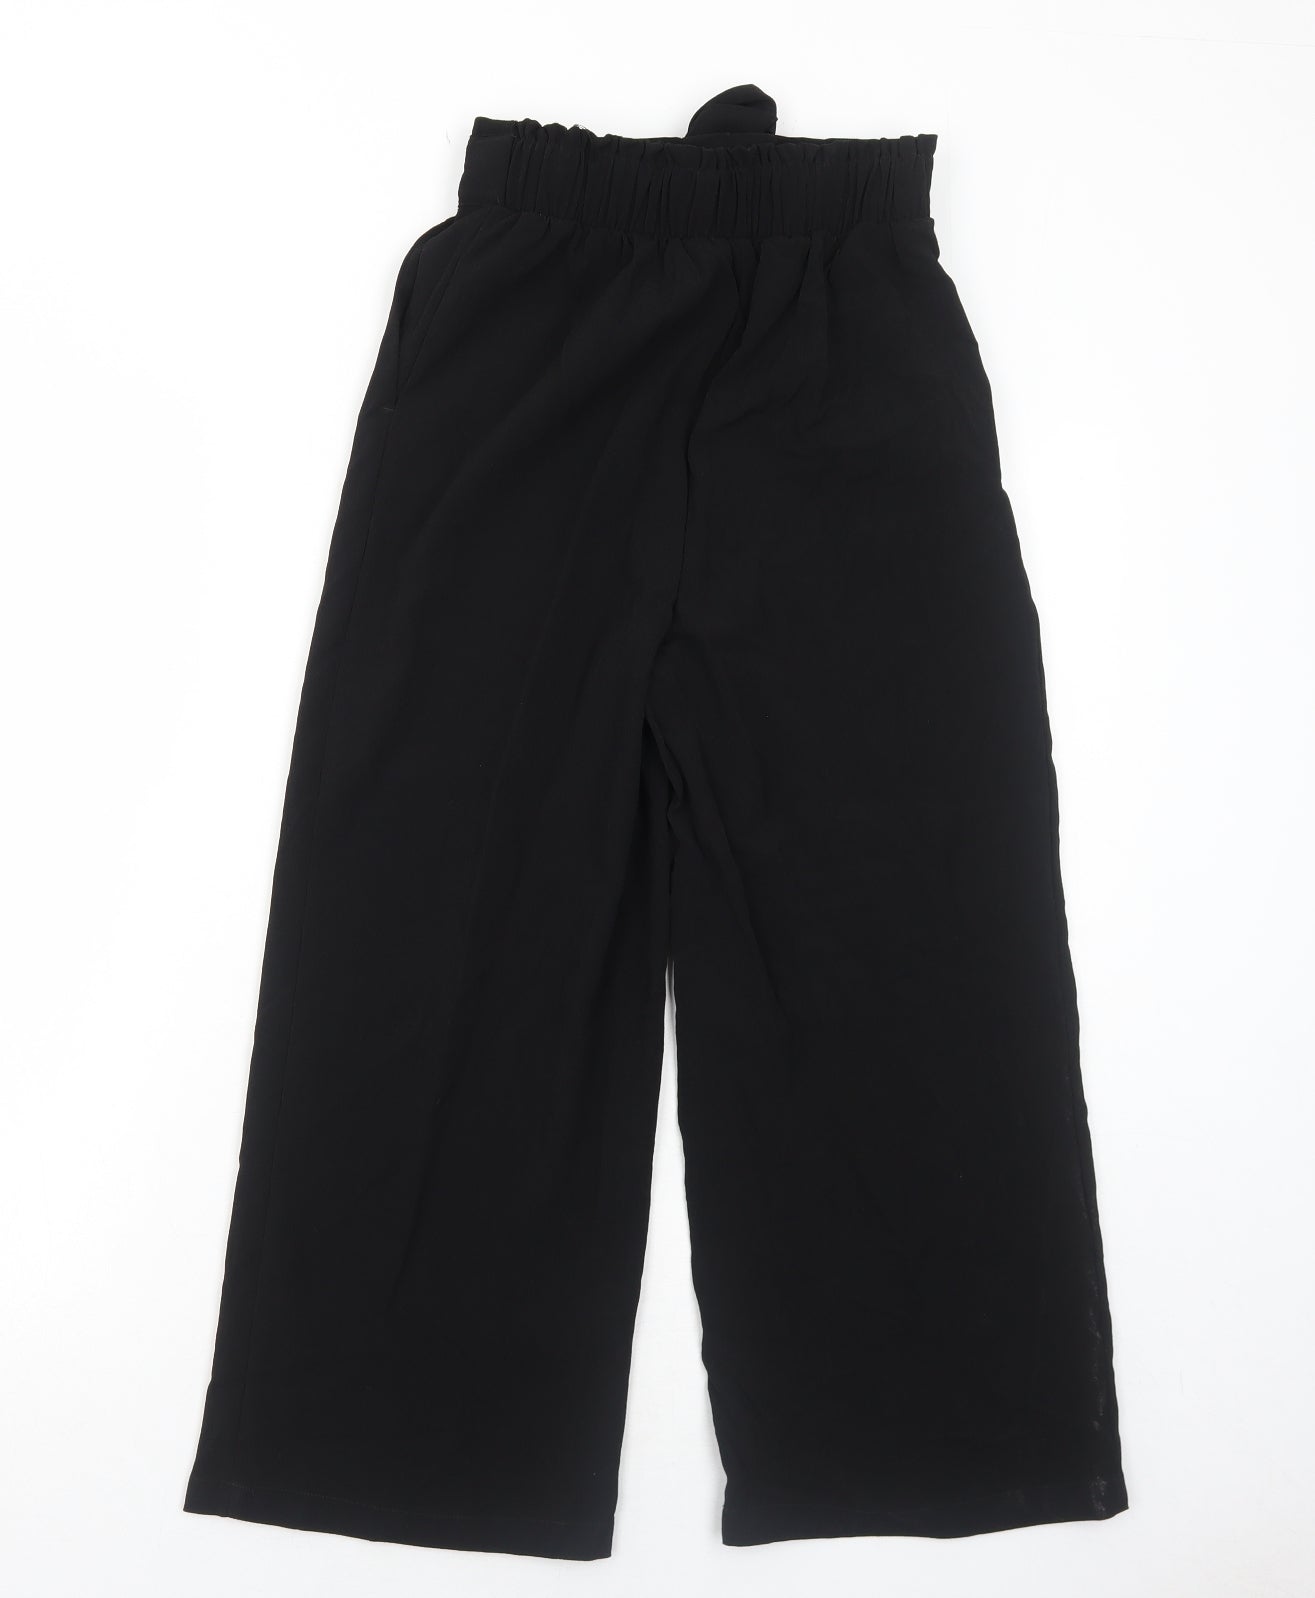 New Look Womens Black Polyester Trousers Size 8 Regular Drawstring